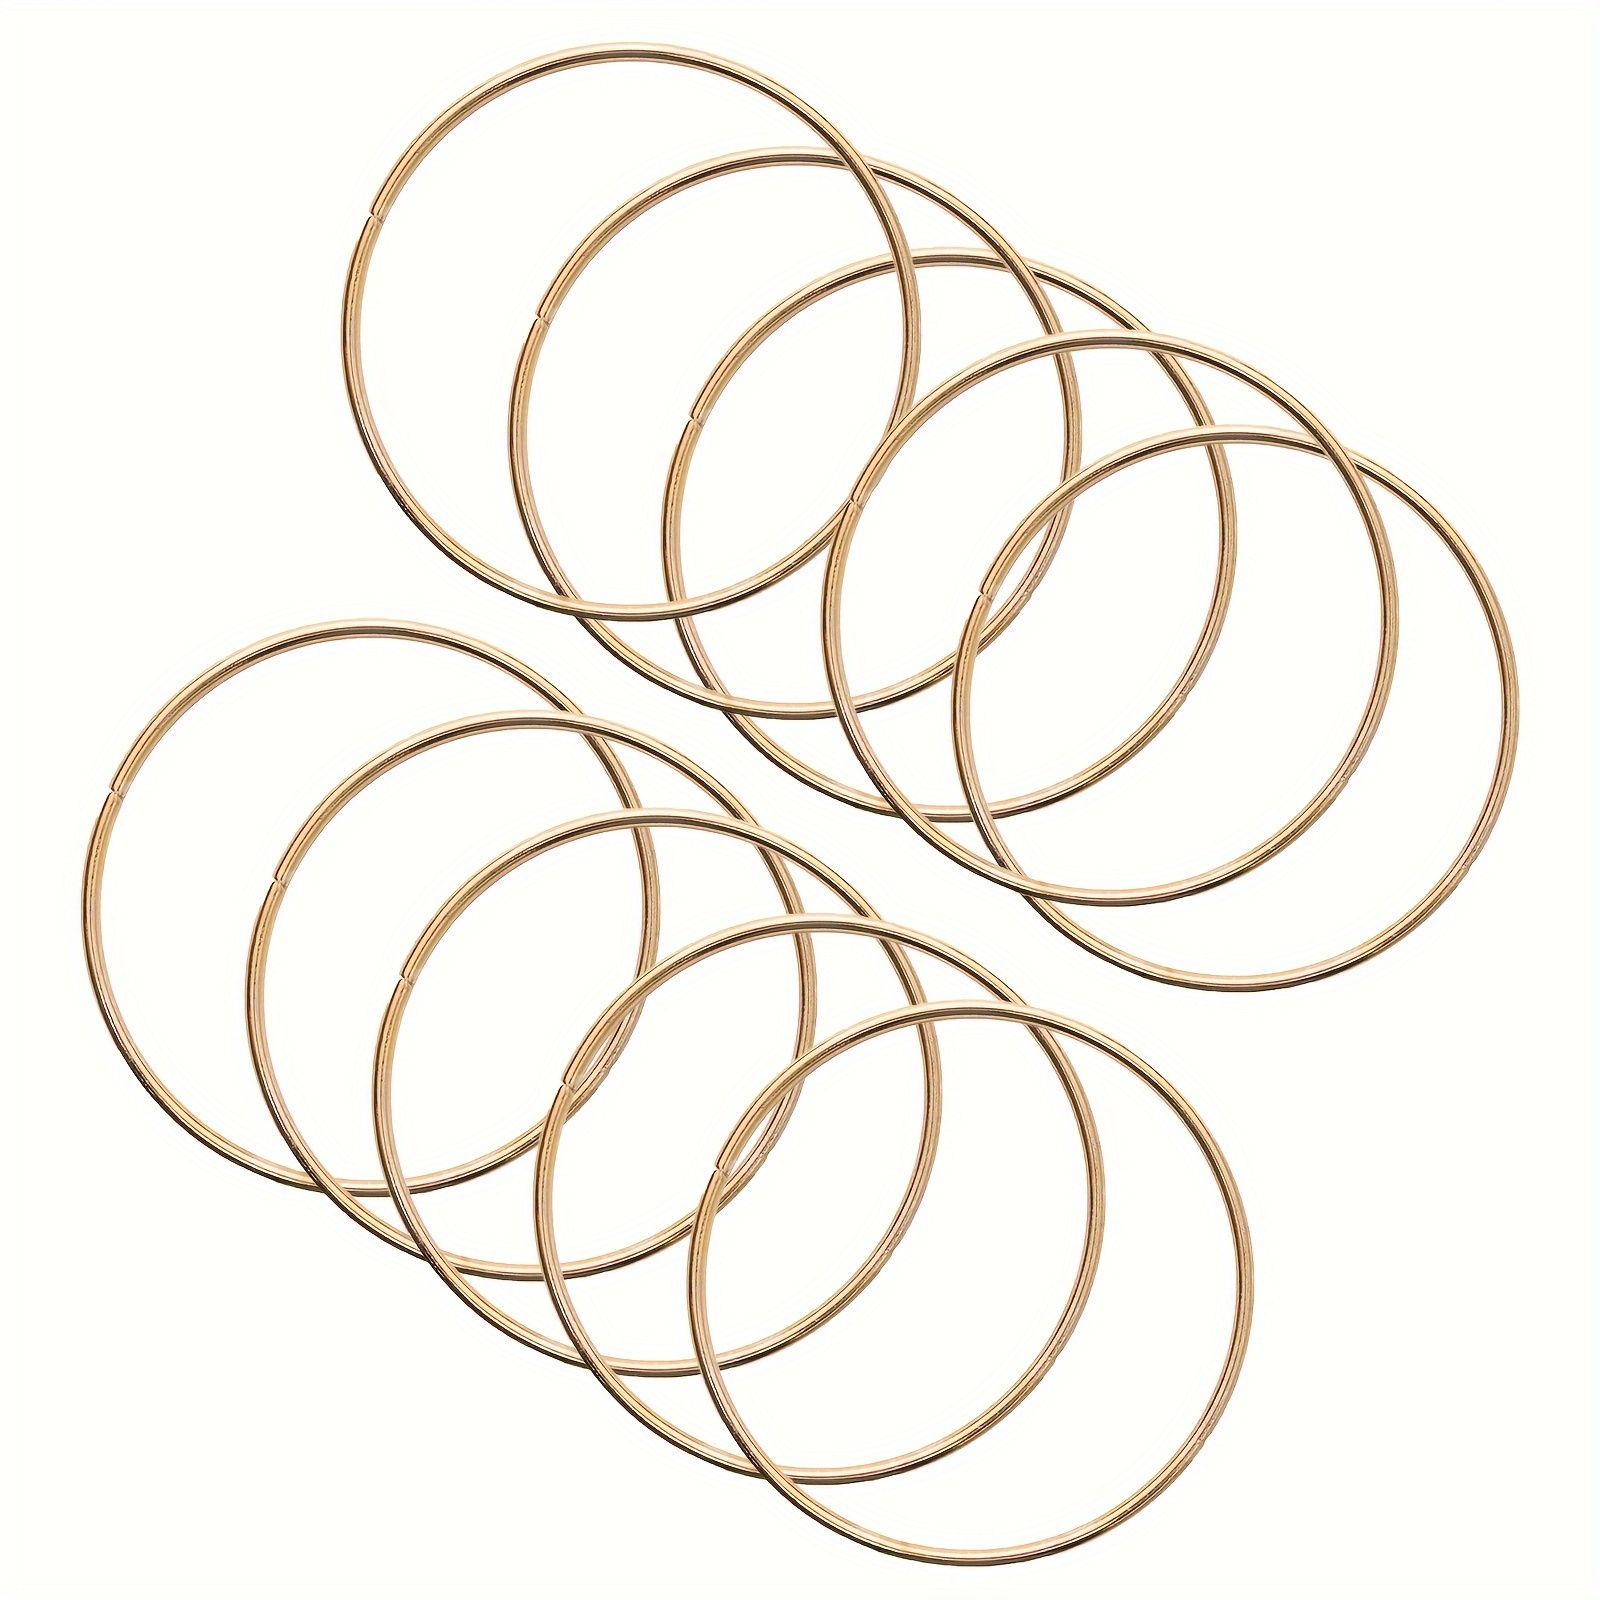 Metal Rings for Crafts 1 inch Small Metal Ring 1 inch 30Pcs Stainless Steel  Welded 4mm Thick Heavy Duty Metal O Ring Macrame Rings for DIY Hardware